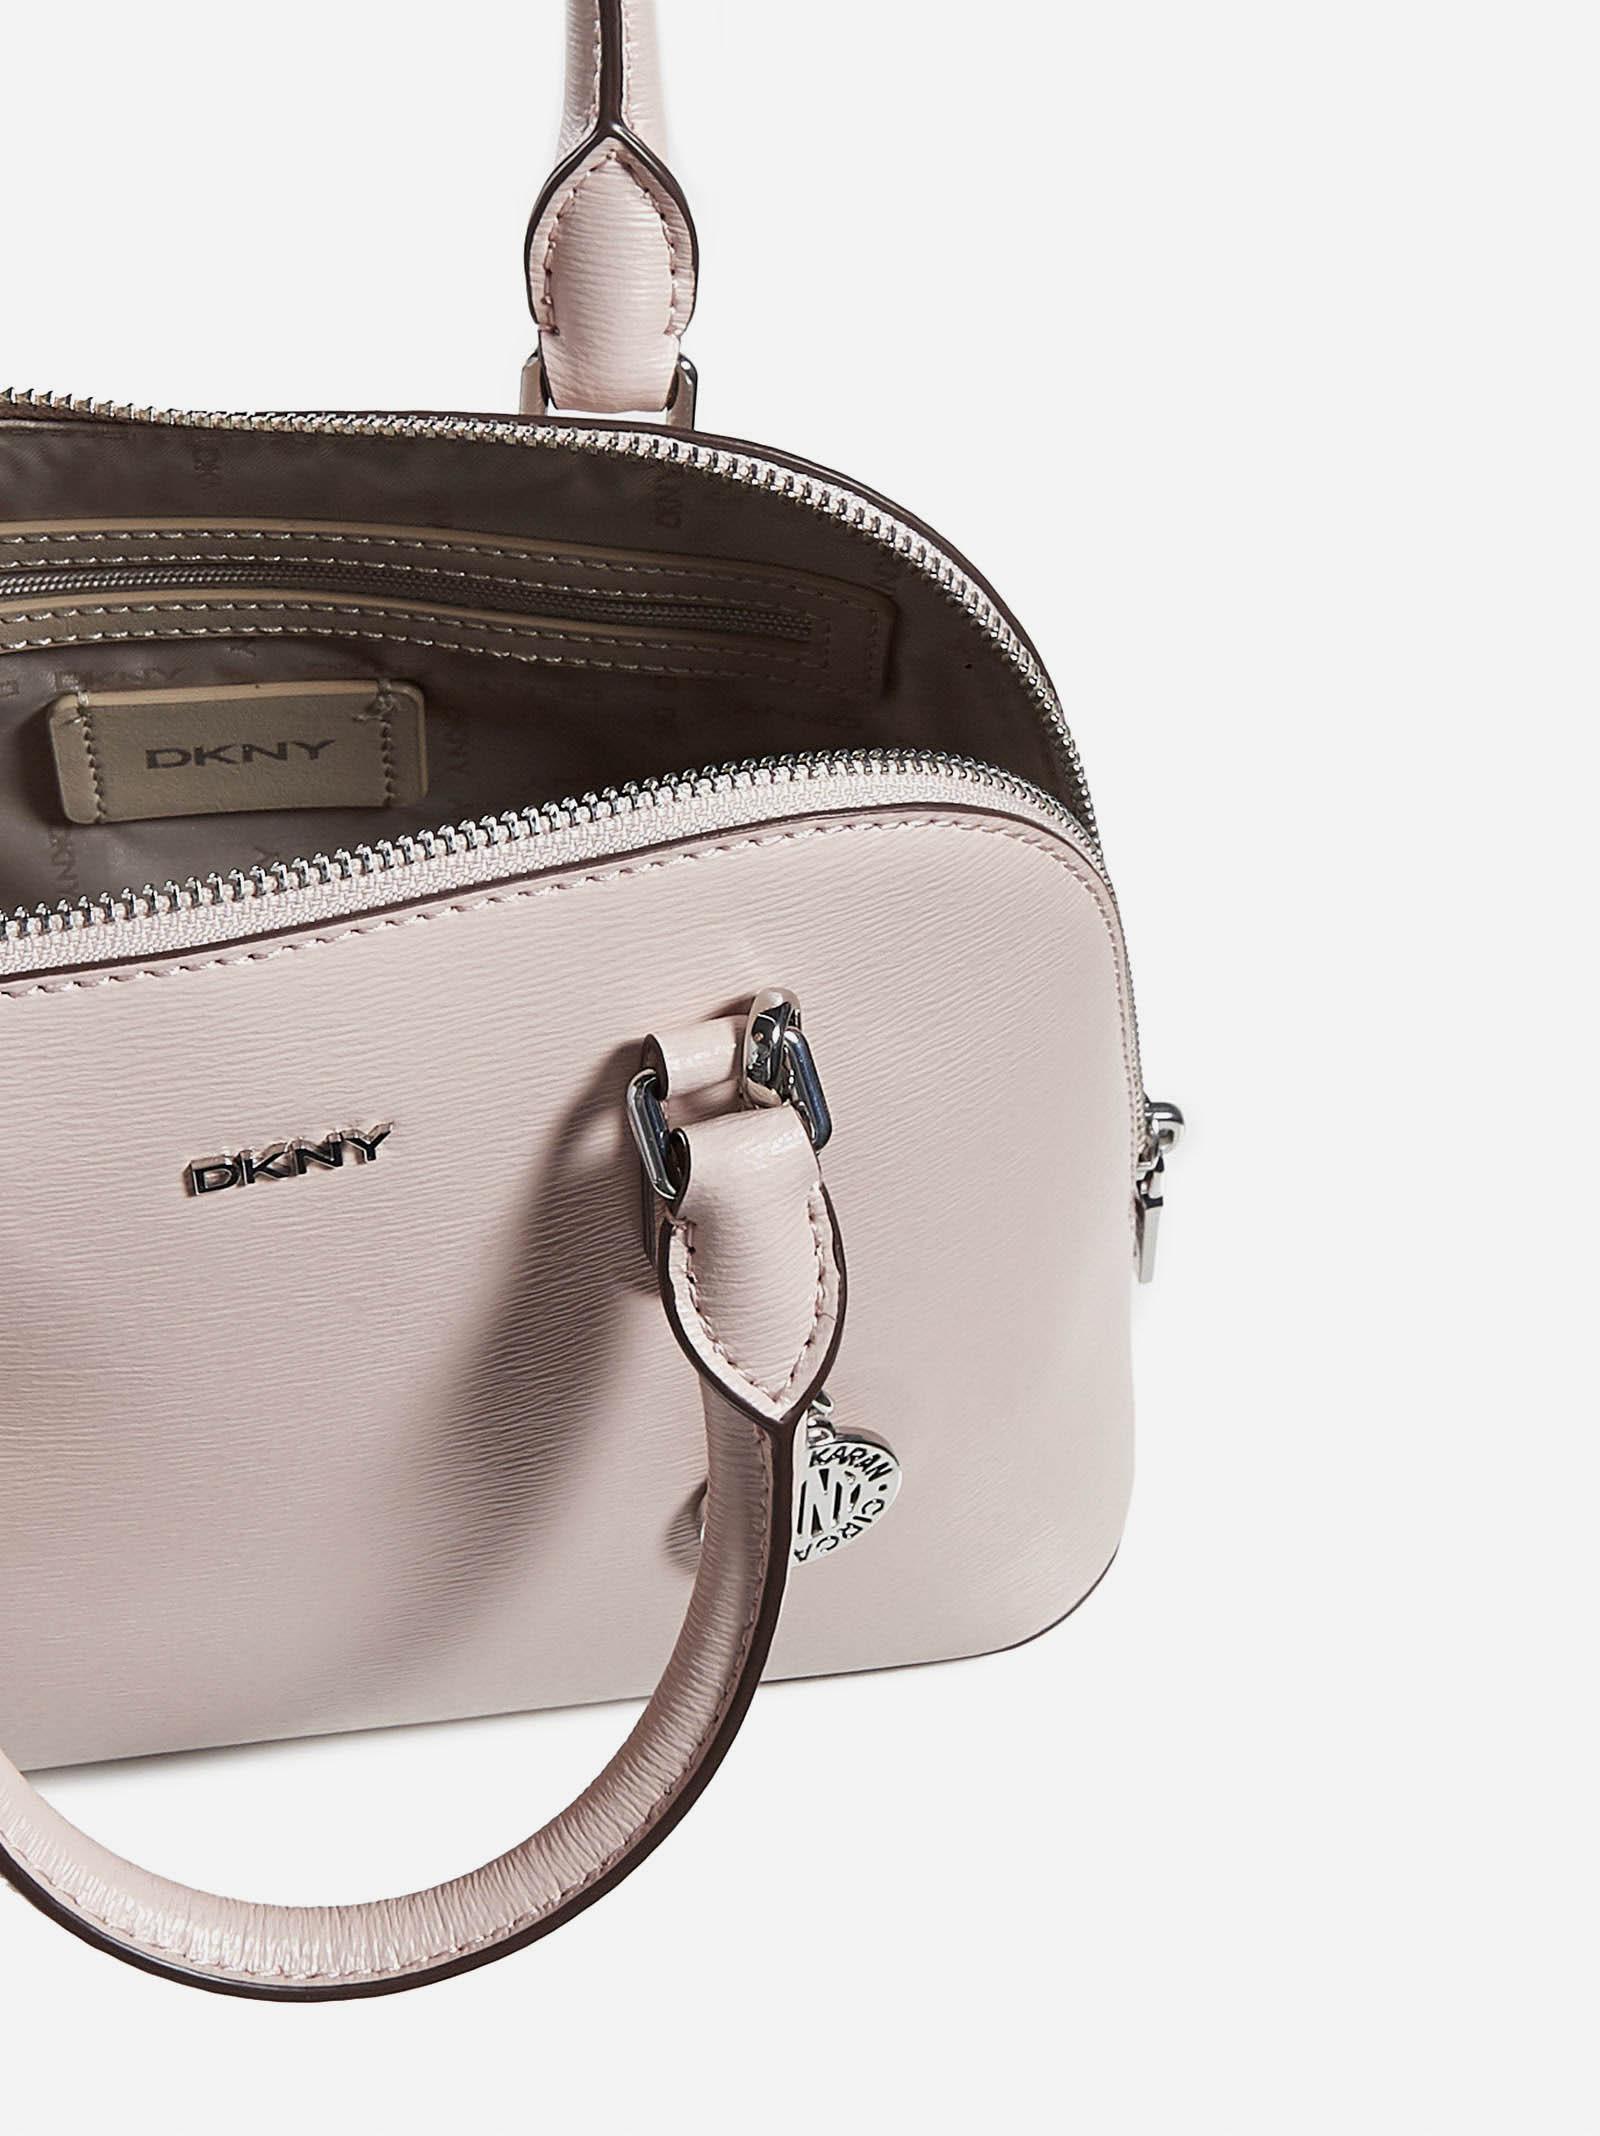 DKNY Bryant Dome Leather Satchel Bag